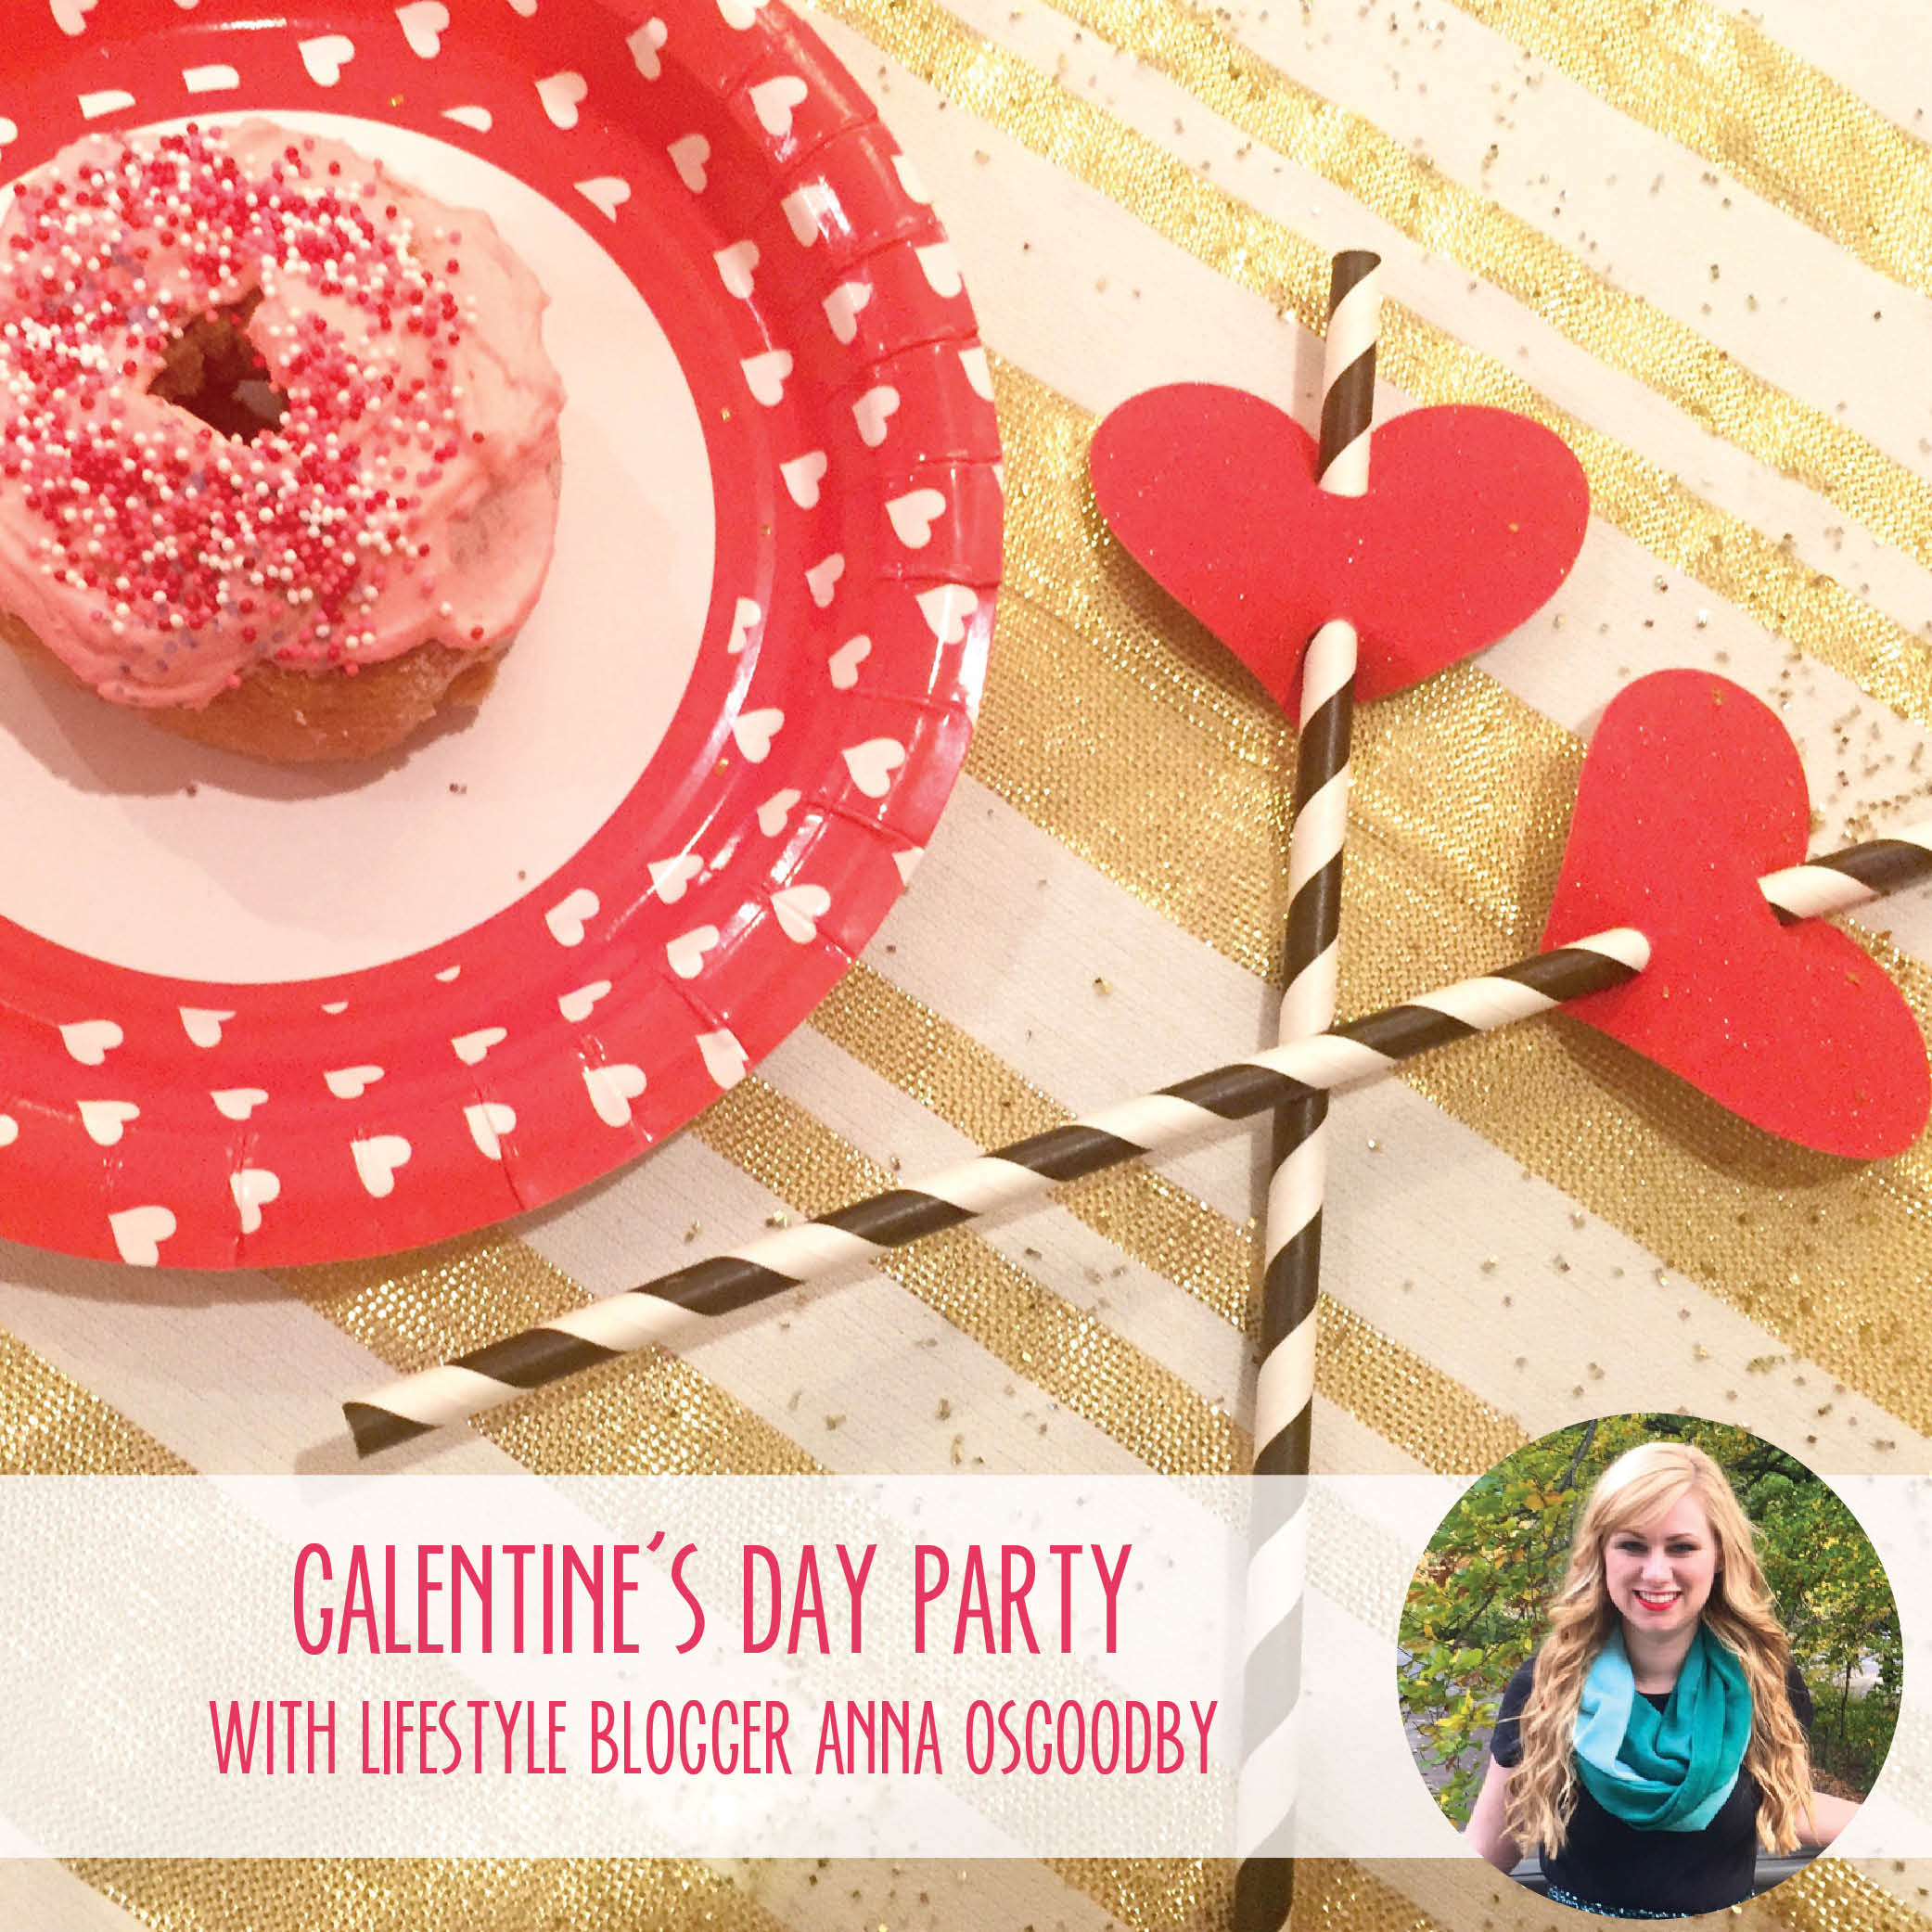 How to host an Awesome Galentine's Day Party